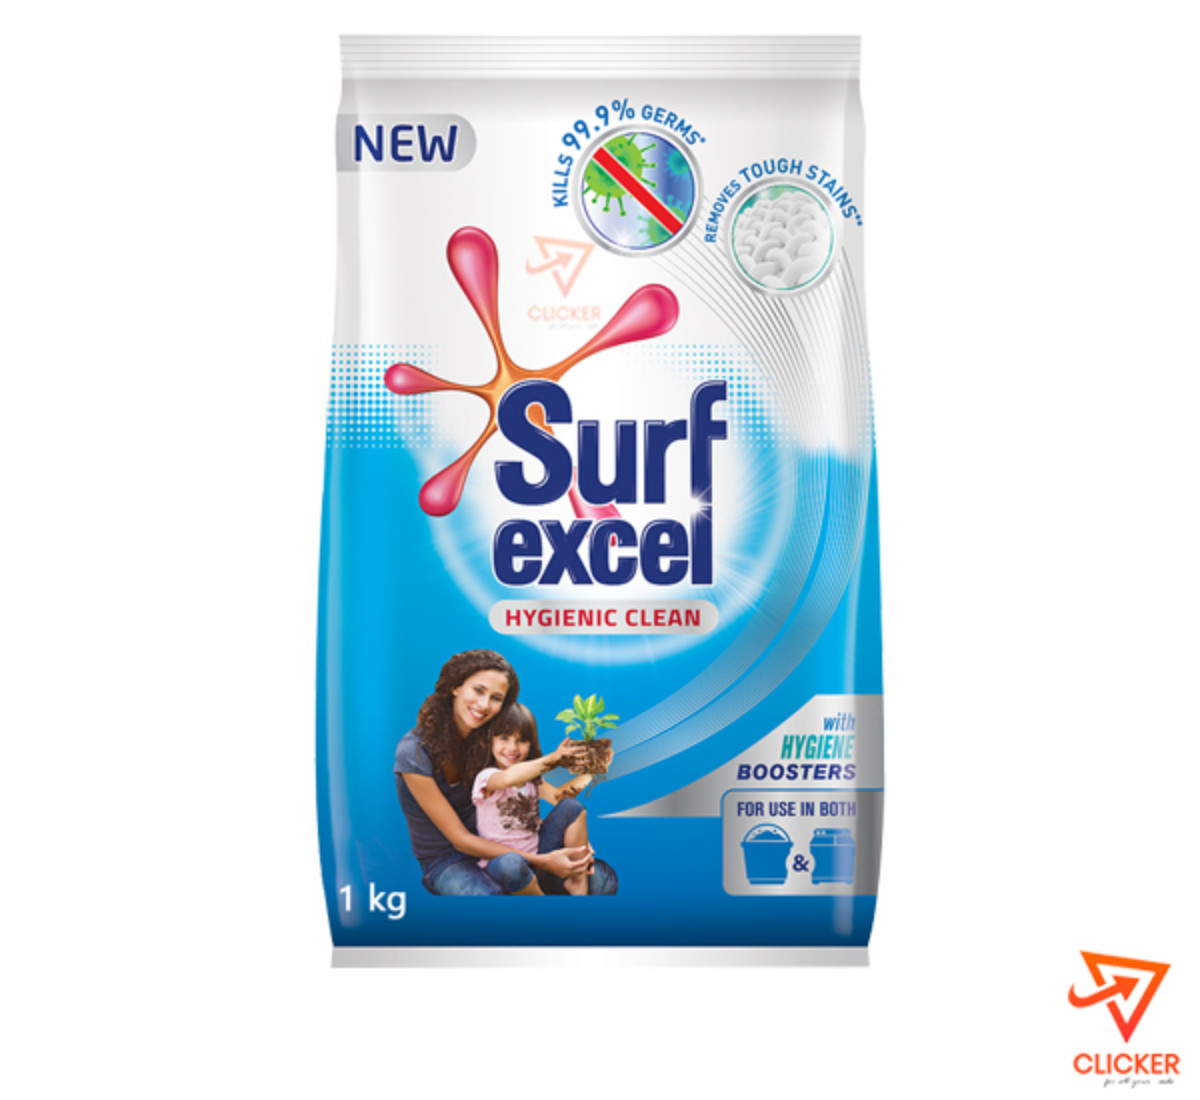 Clicker product surf excel with hygiene boosters 1169